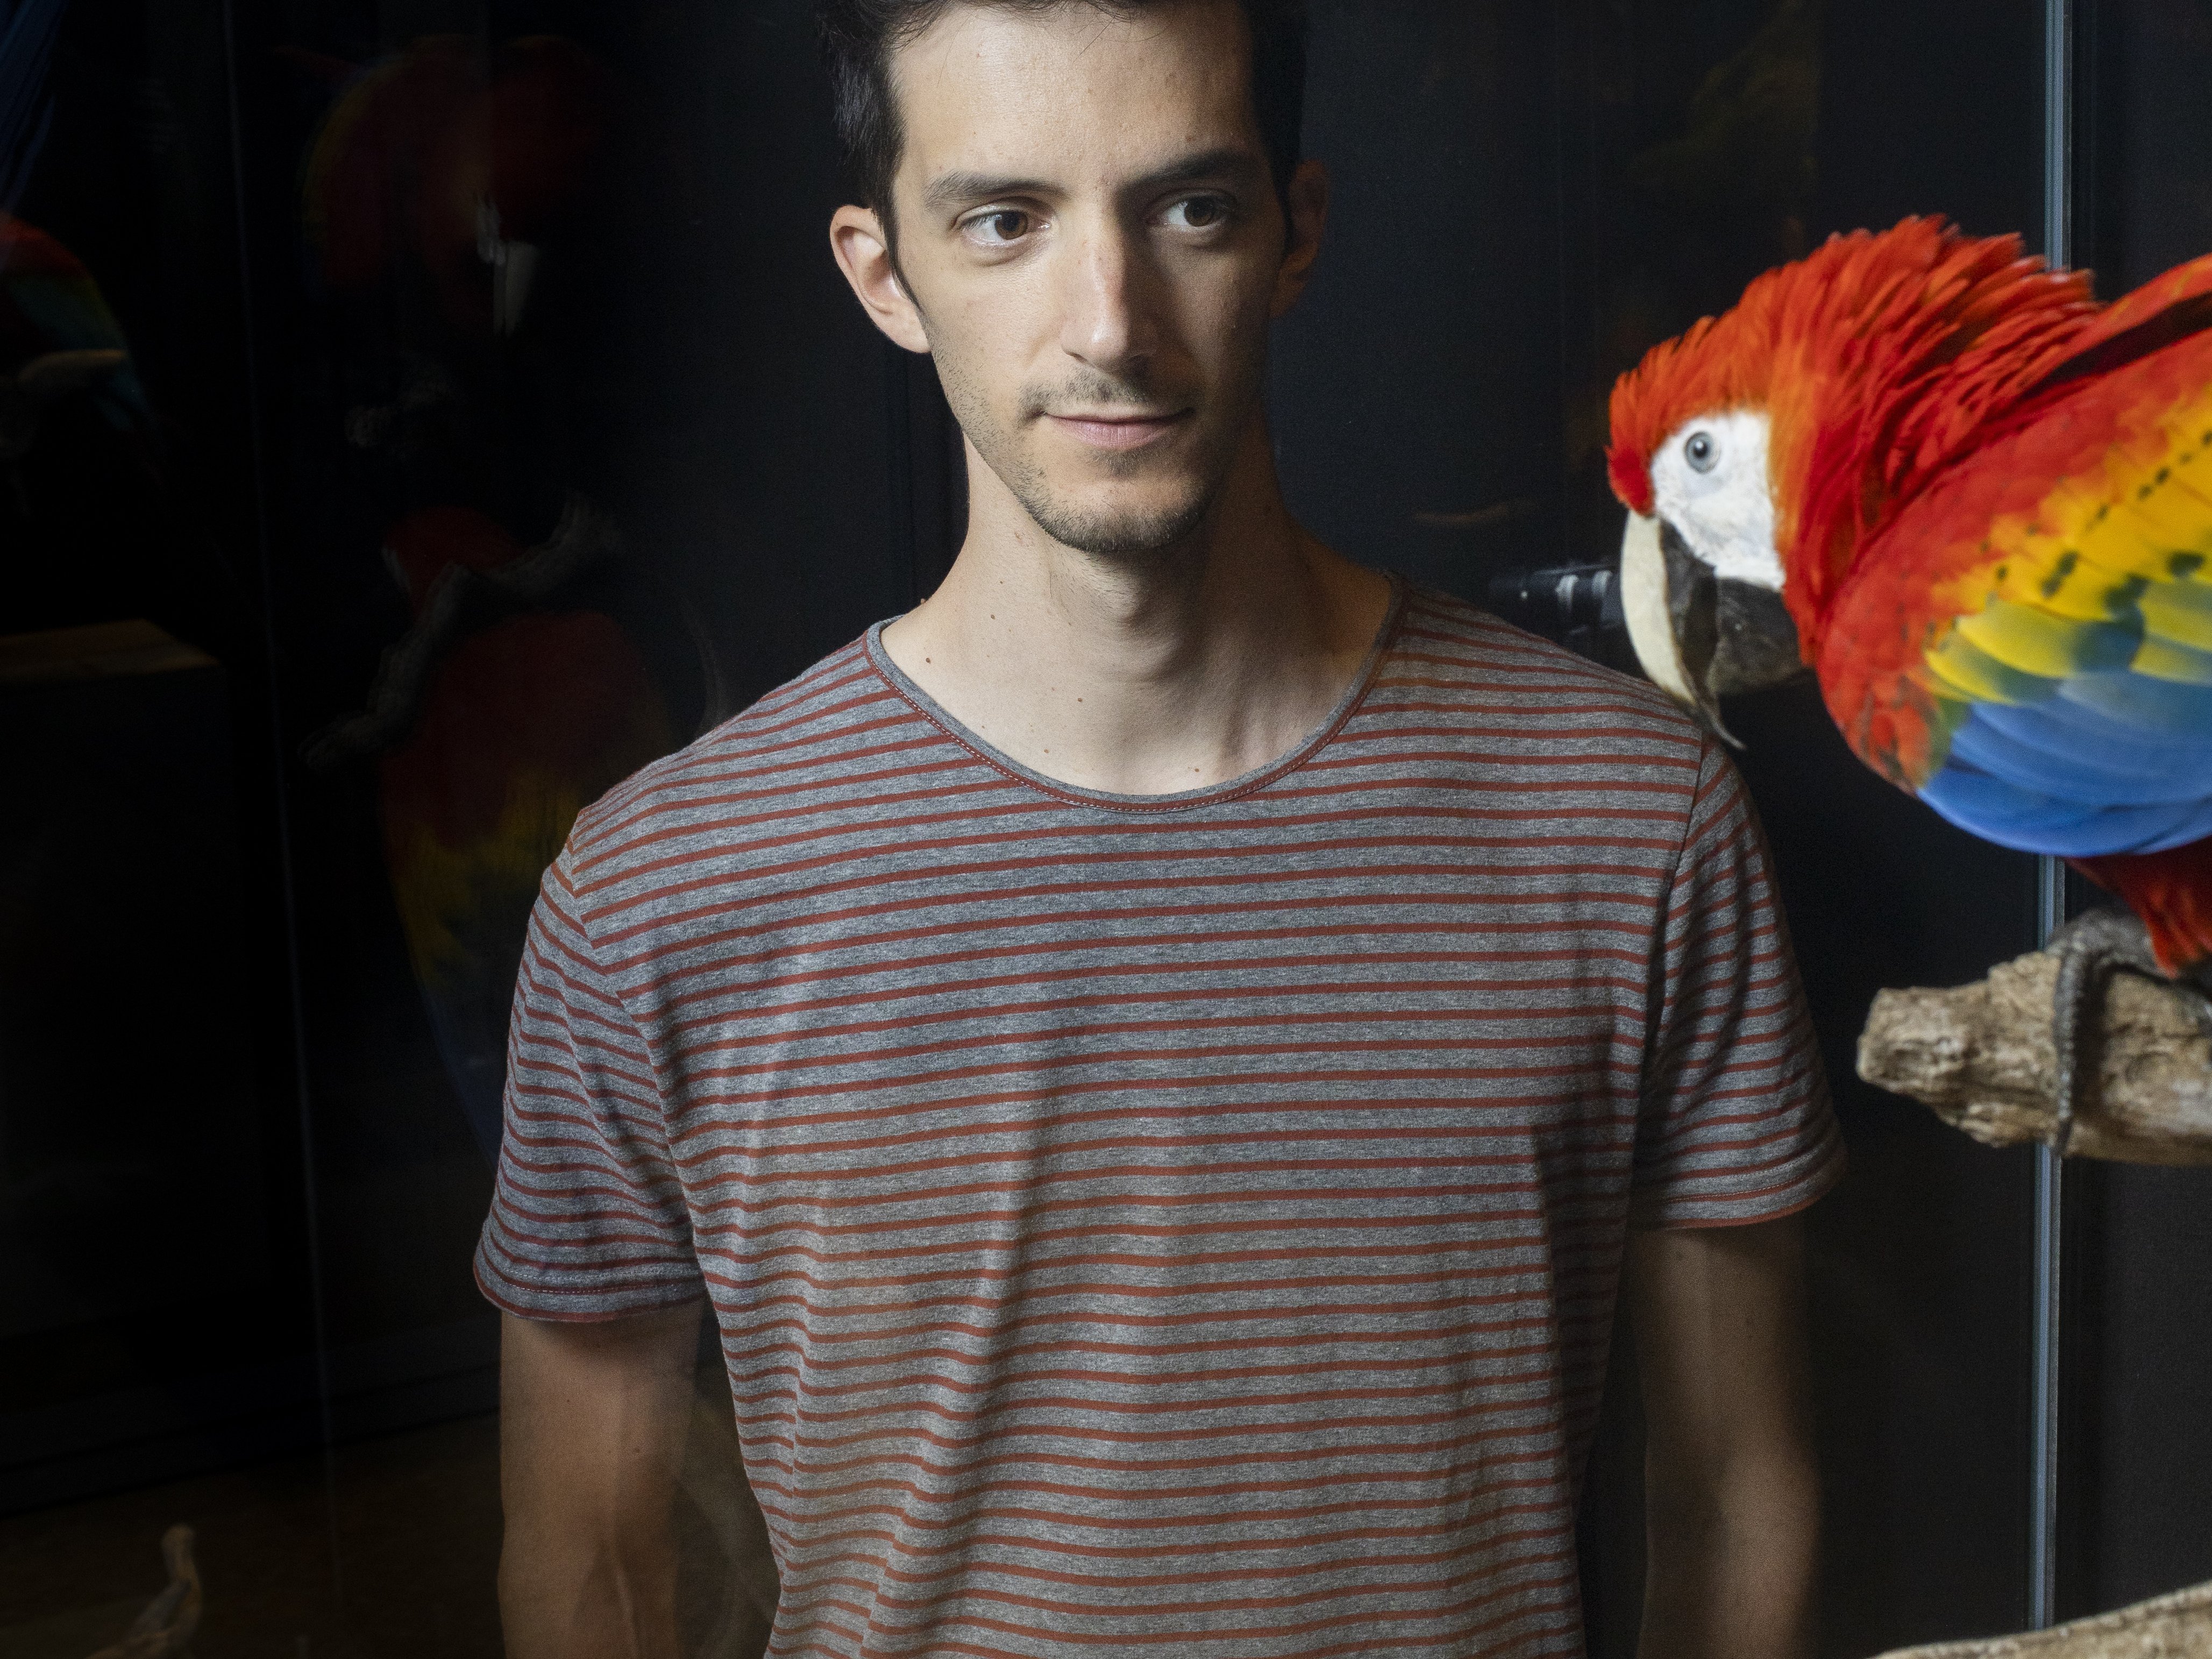 Bruno Delepelaire next to a red parrot.